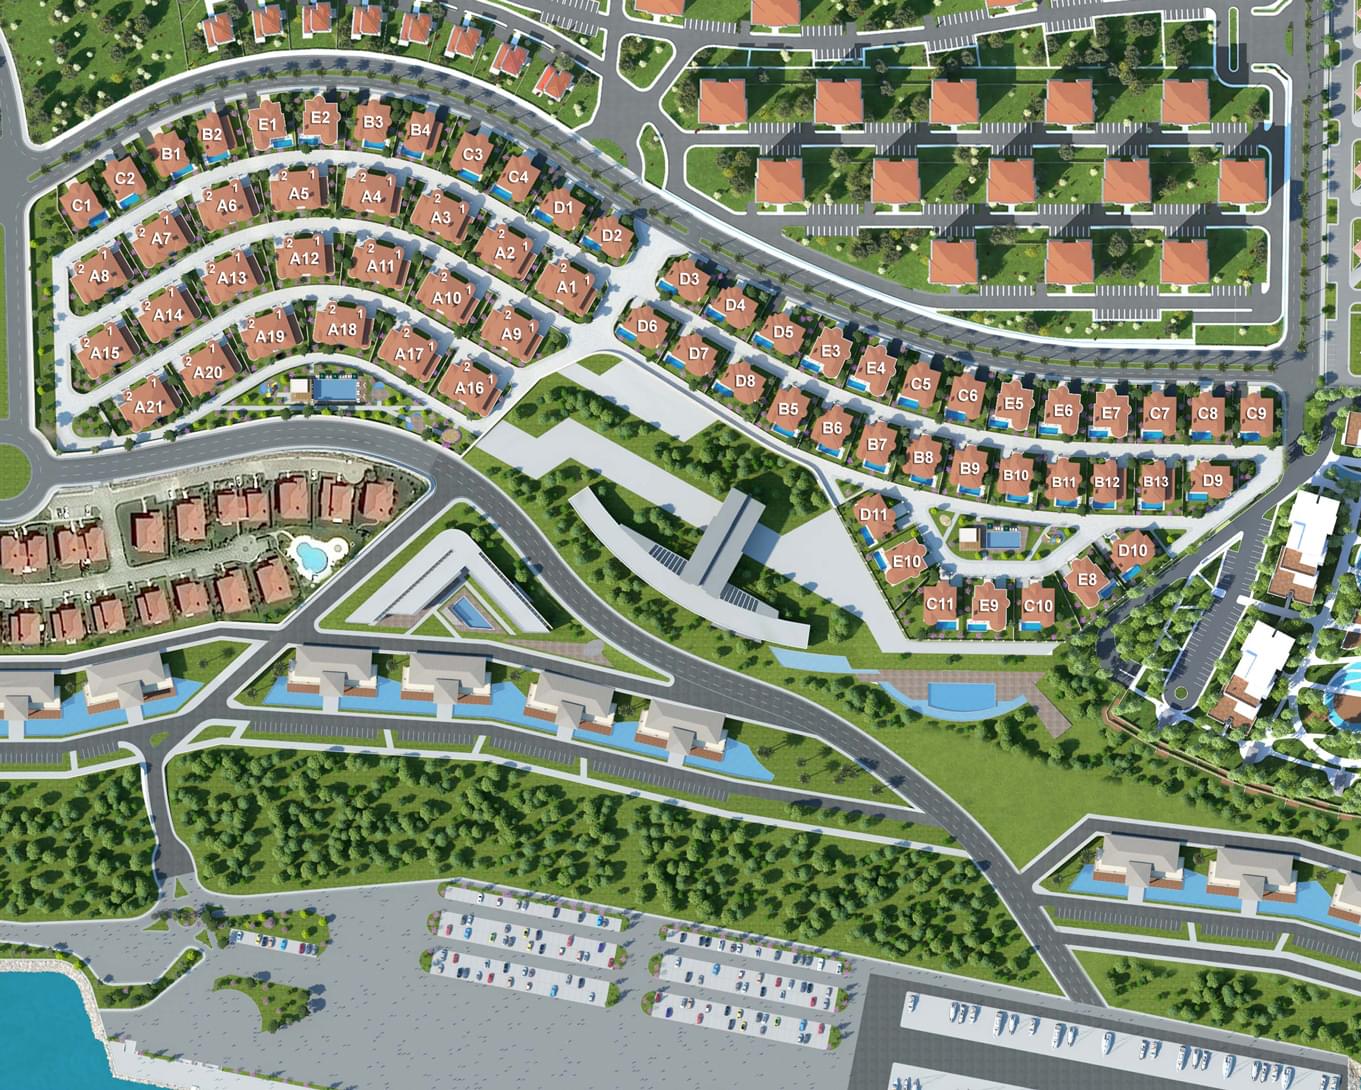 Ready for living villas in one of the largest projects in Istanbul, Beylikduzu district